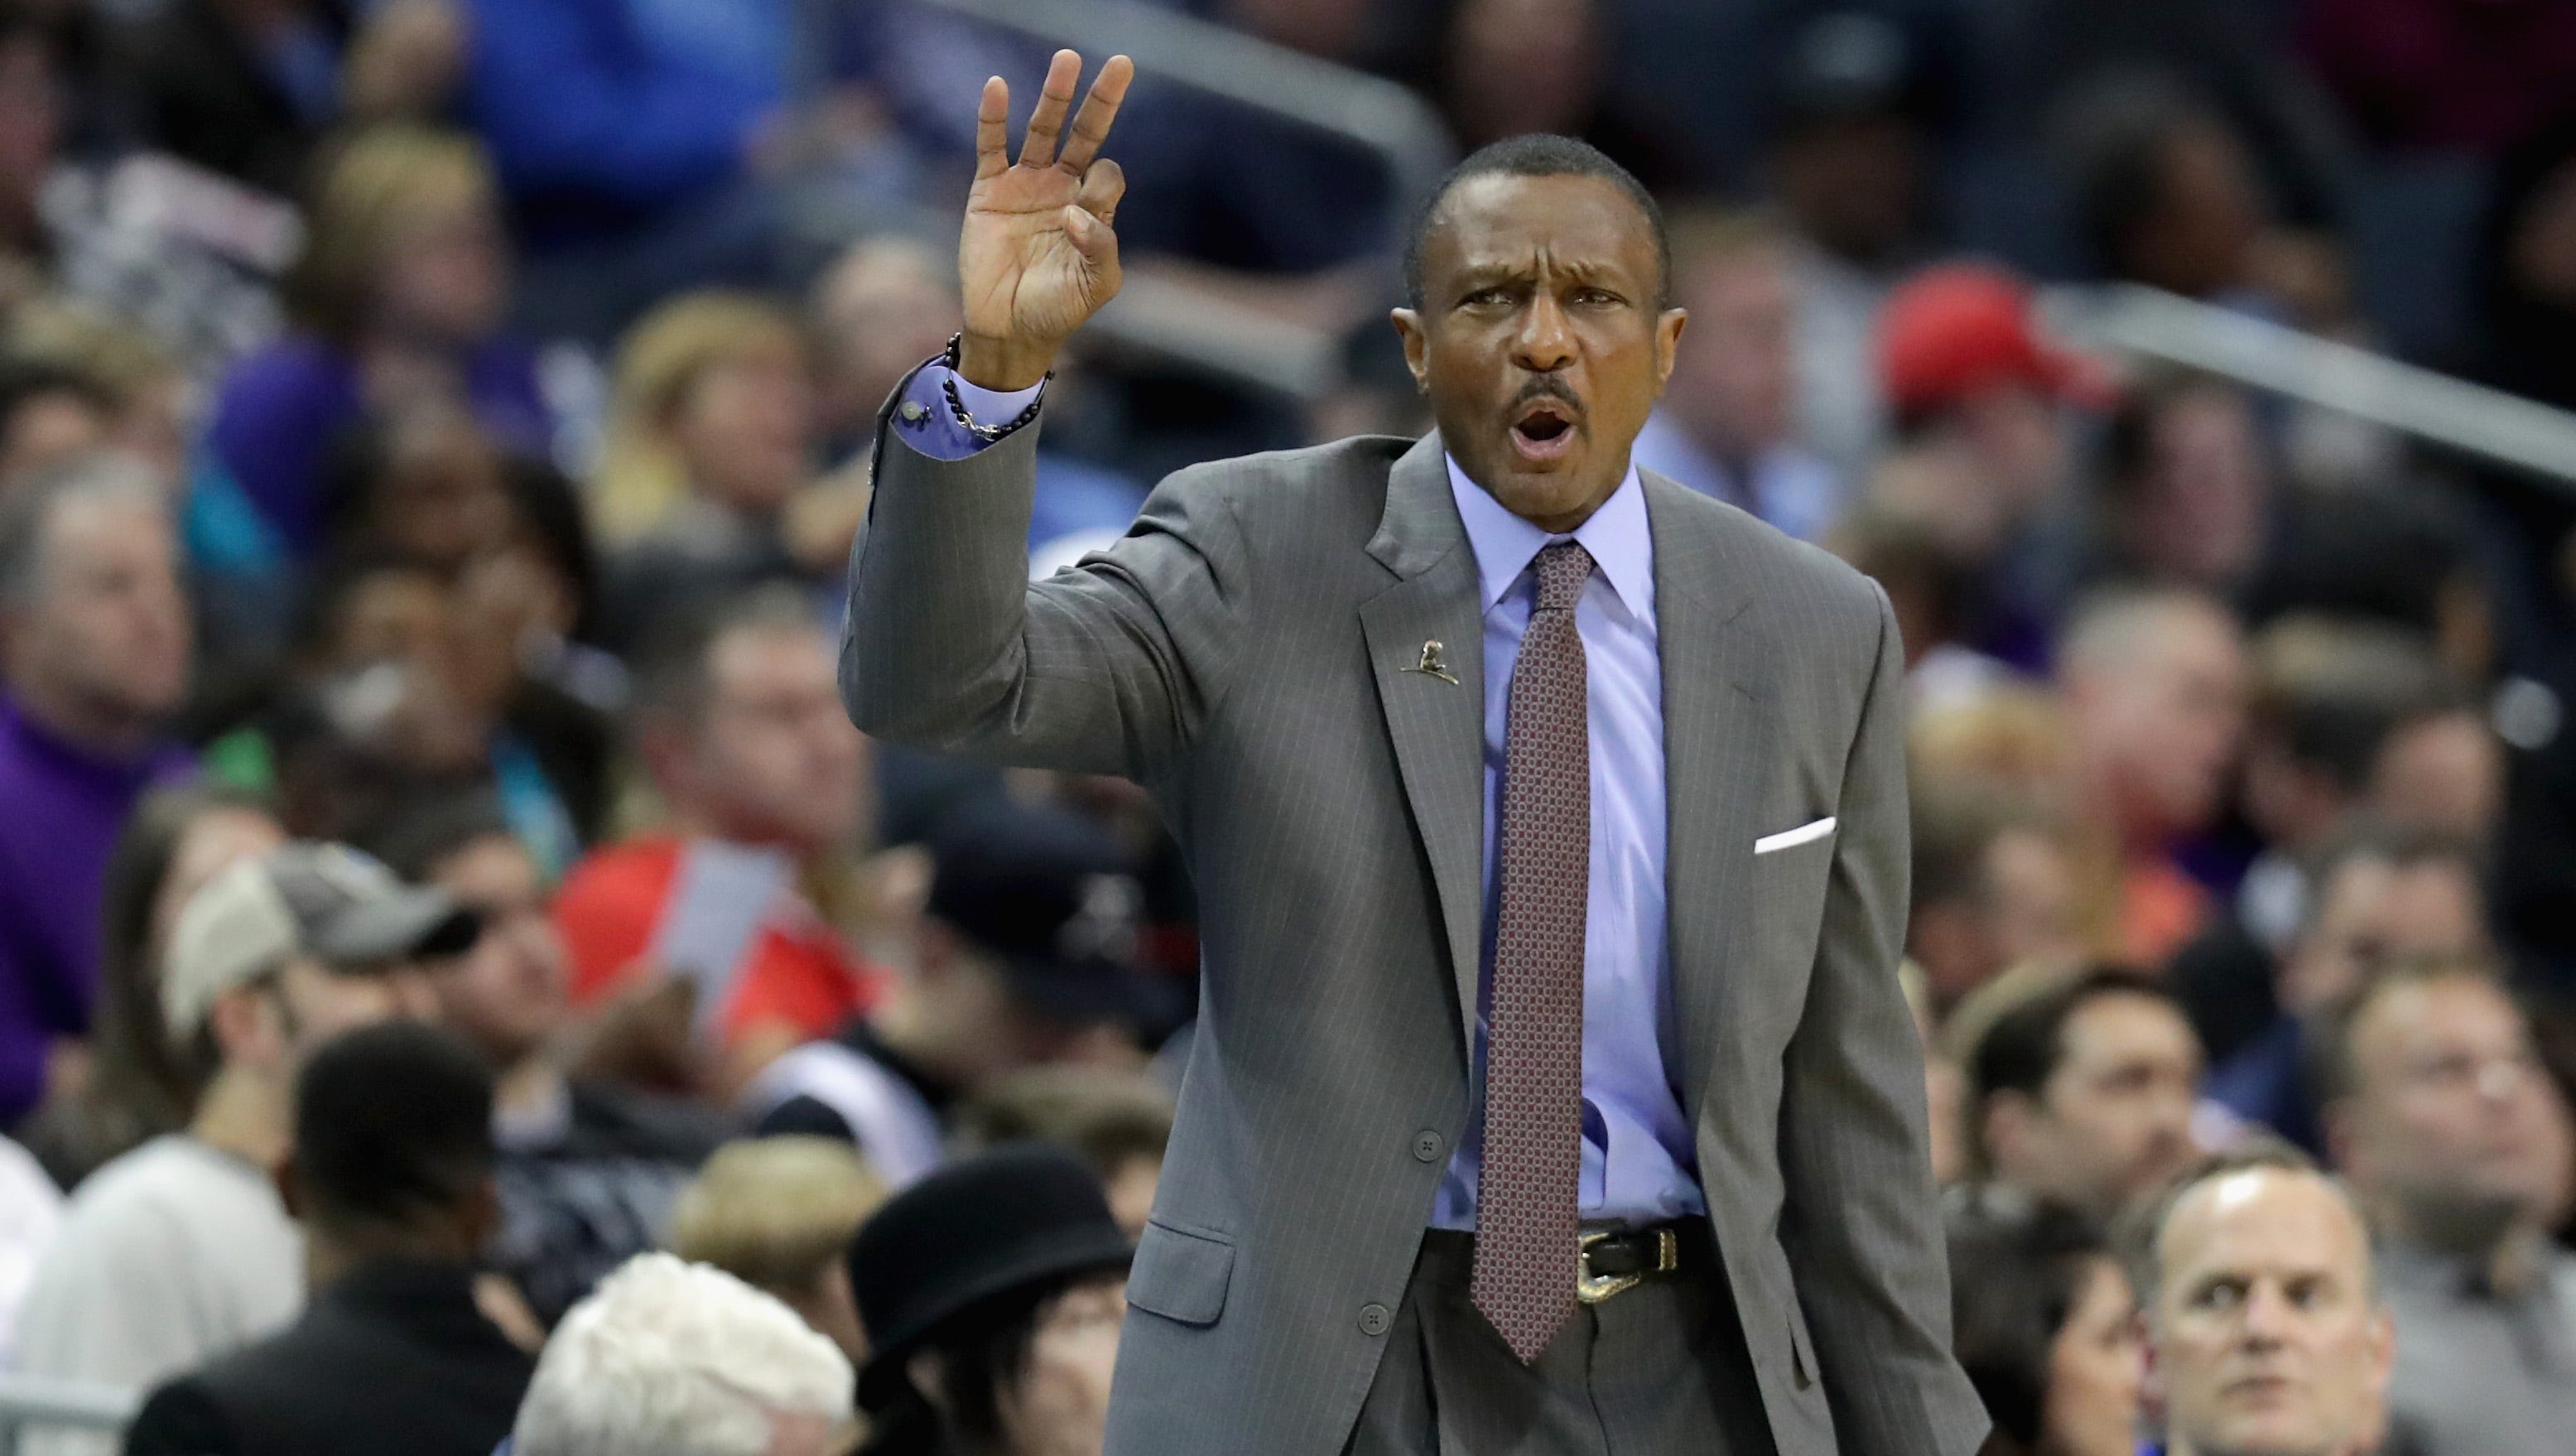 Dwane Casey of the Toronto Raptors yells to his team during their game against the Charlotte Hornets at Spectrum Center on January 20, 2017 in Charlotte, North Carolina.